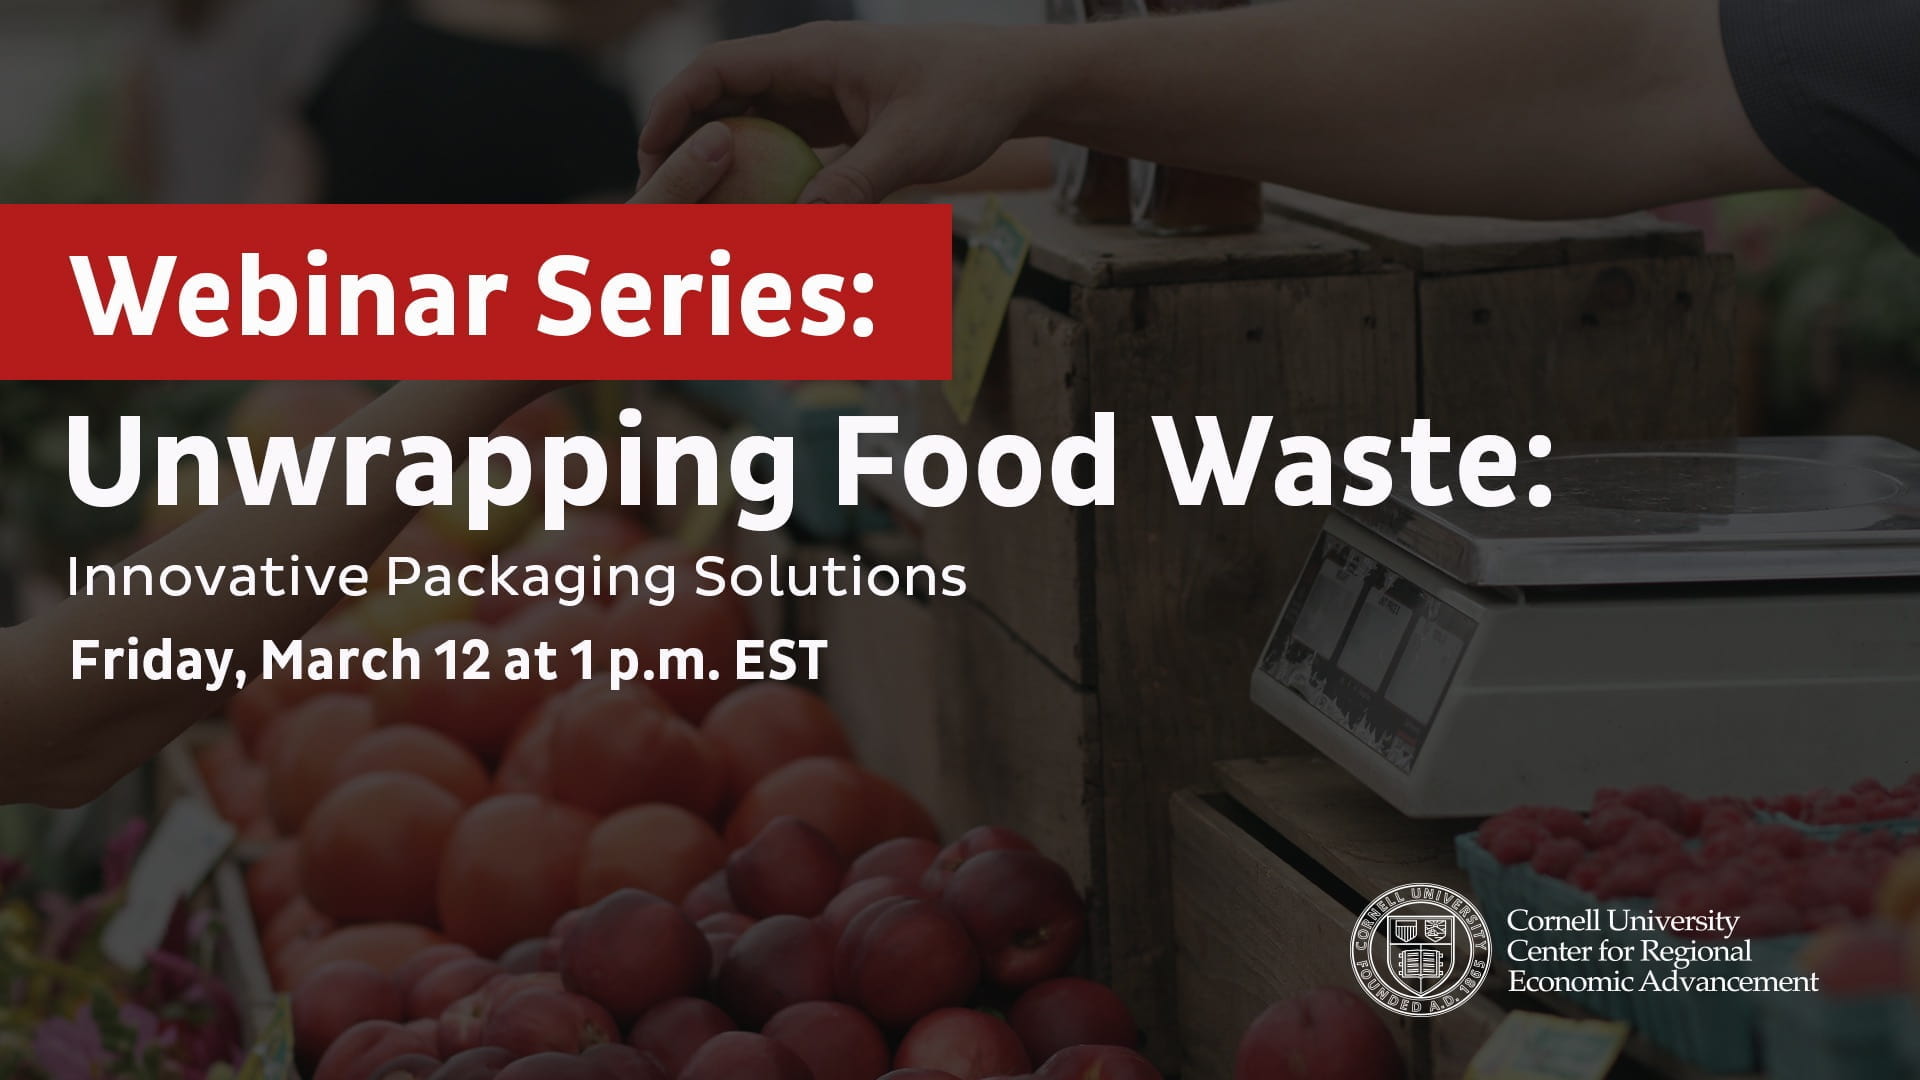 Webinar Series: Unwrapping Food Waste: Innovative Packaging Solutions, March 12